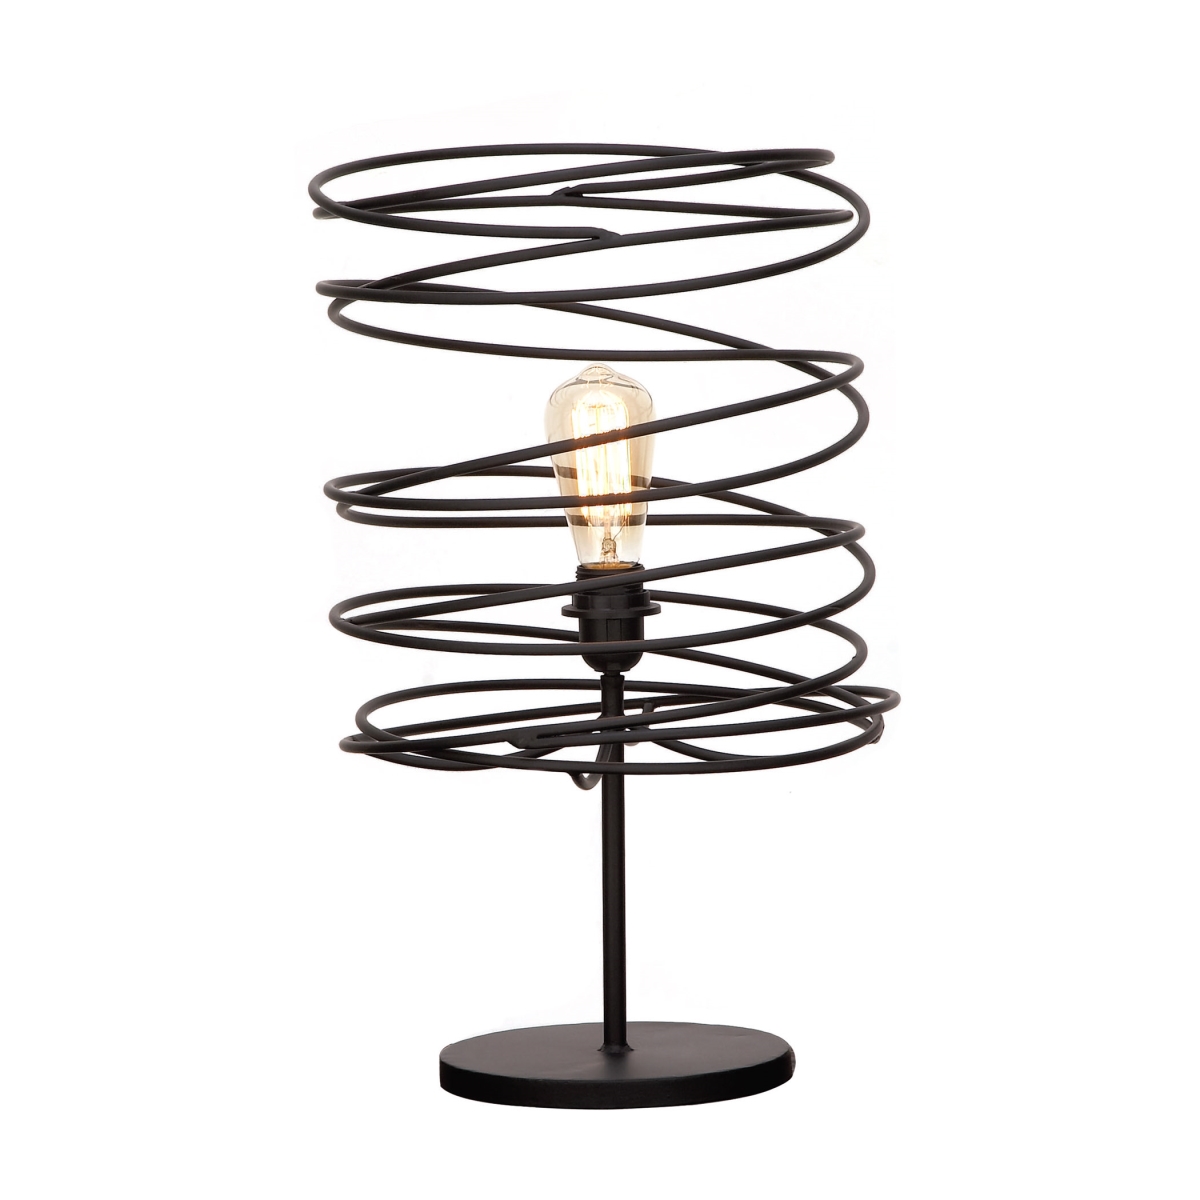 Urban Designs 7718629 Coiled Iron Shade Table Lamp - 20 X 11 X 11 In.